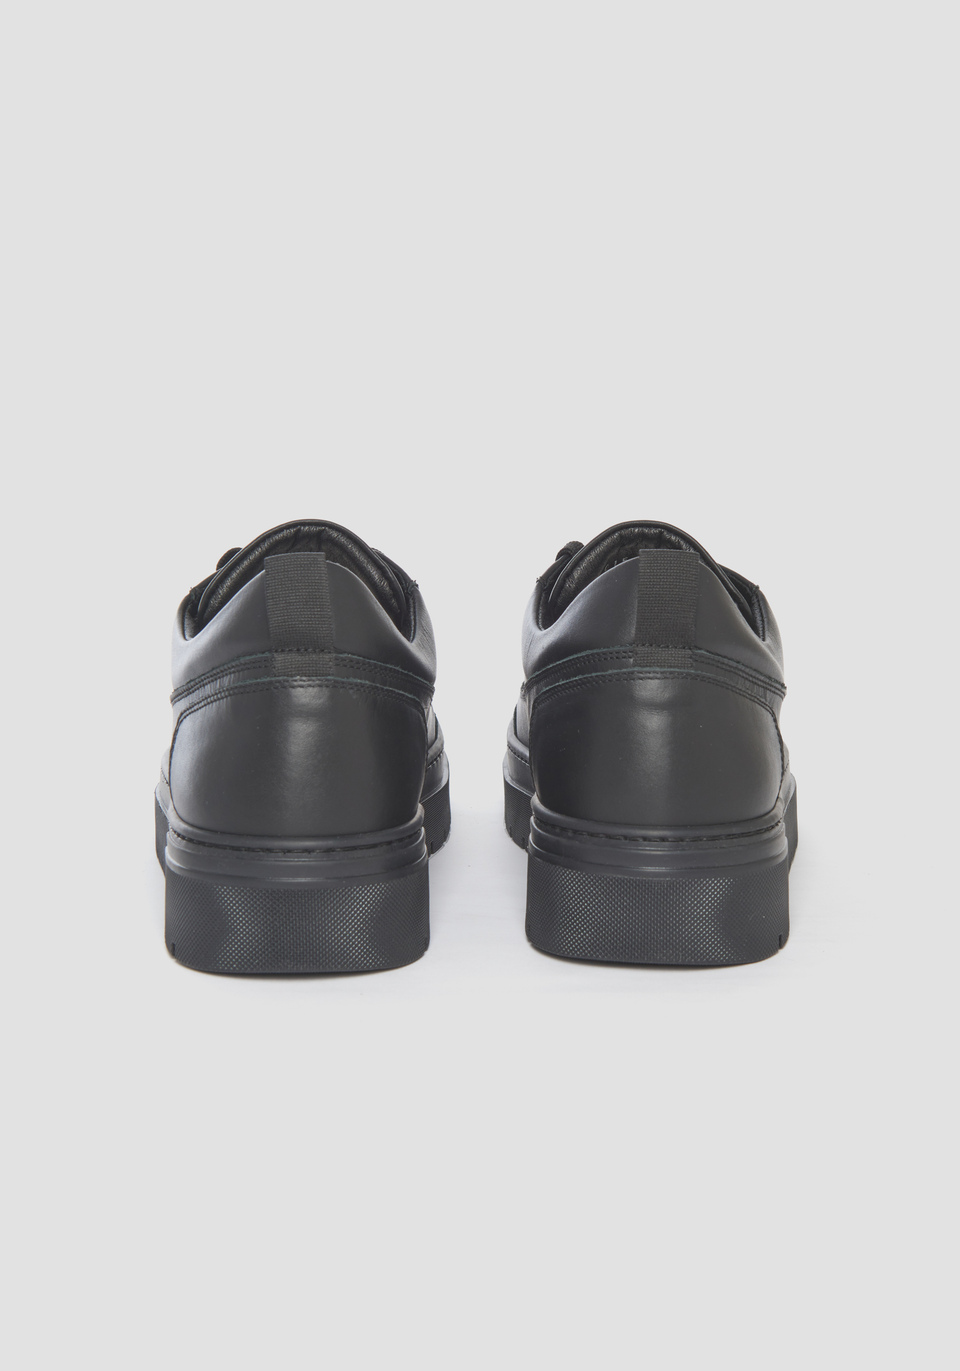 "FLINT" SNEAKERS IN LEATHER WITH TONE-ON-TONE DETAILS - Antony Morato Online Shop